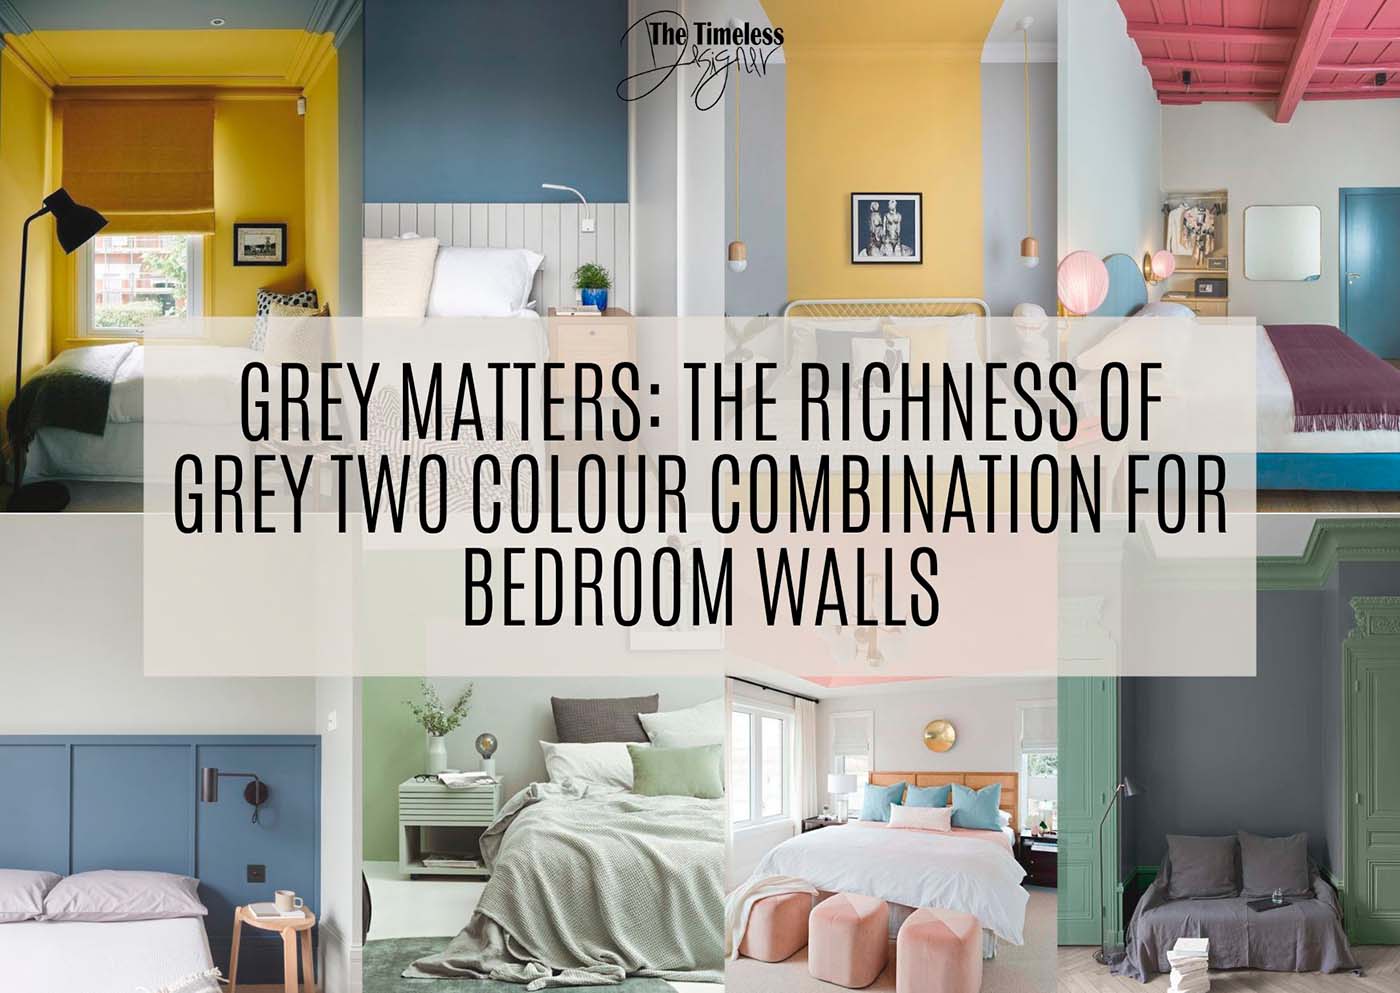 Grey Matters The Richness of Grey Two Colour Combination For Bedroom Walls Image